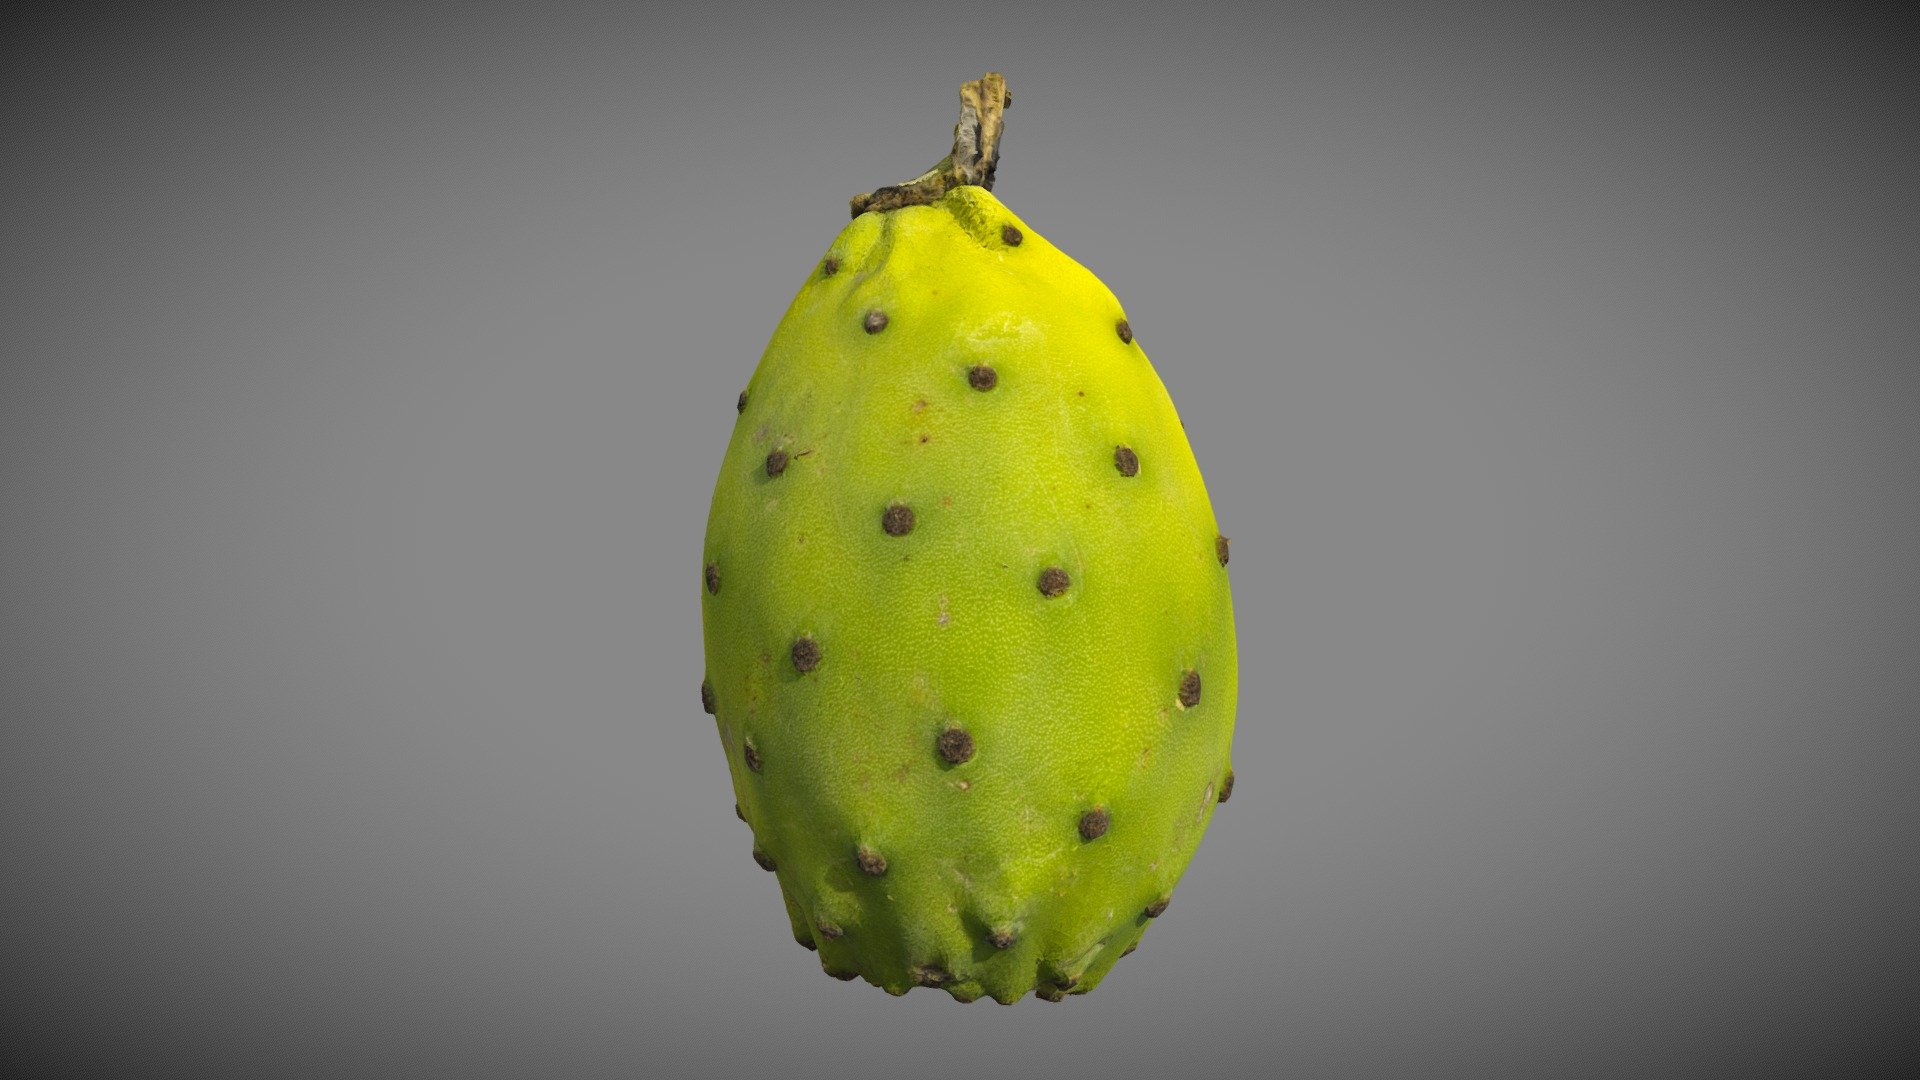 Scan of a Green Cactus Fruit / Prickly Pear / Barbary Fig / Indian Fig Opuntia
(high-poly models included)

More colors:
https://skfb.ly/oNn7P - Green Prickly Pear - Buy Royalty Free 3D model by Eydeet 3d model